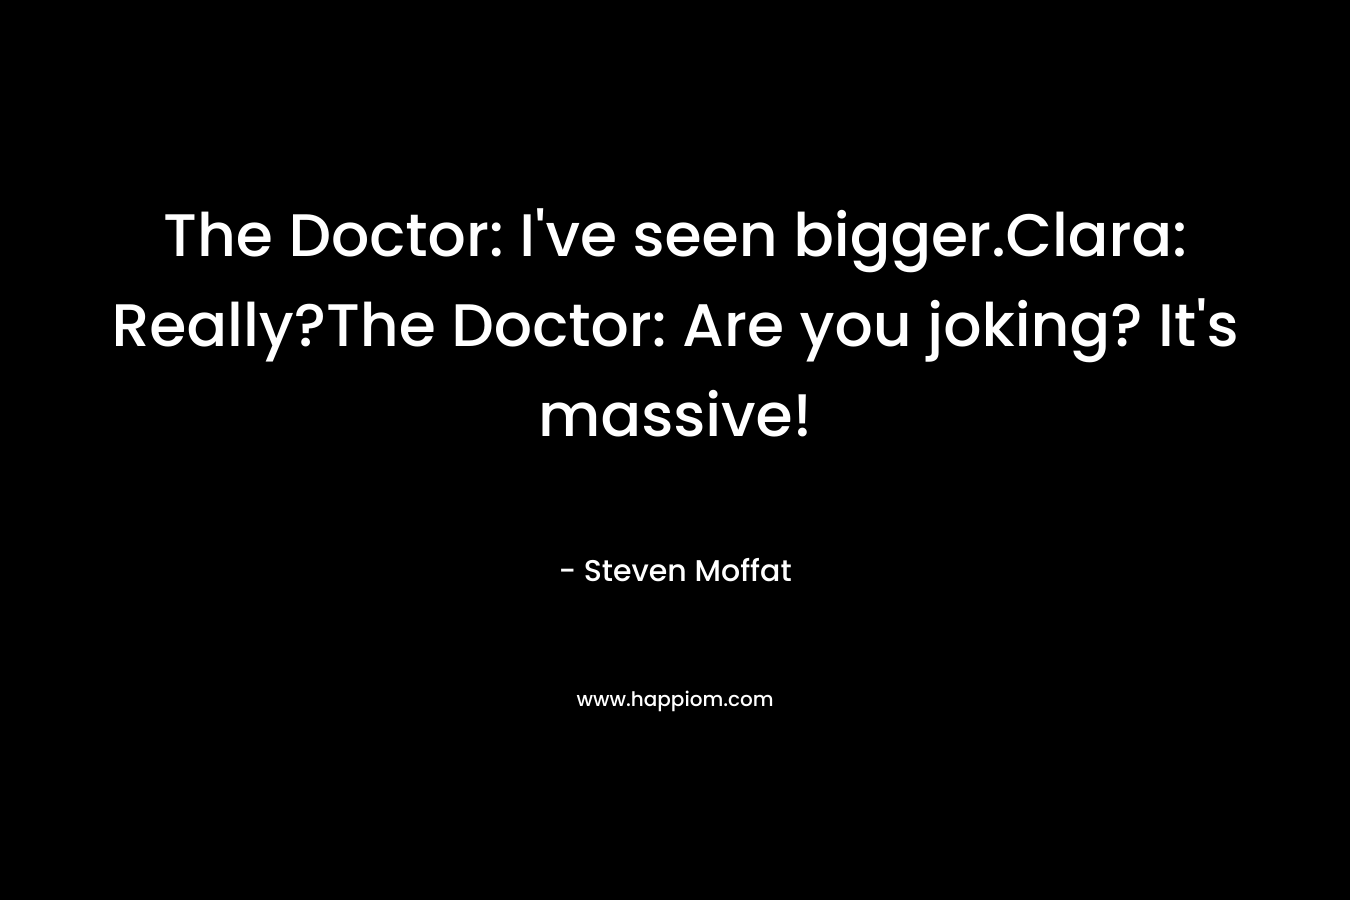 The Doctor: I've seen bigger.Clara: Really?The Doctor: Are you joking? It's massive!